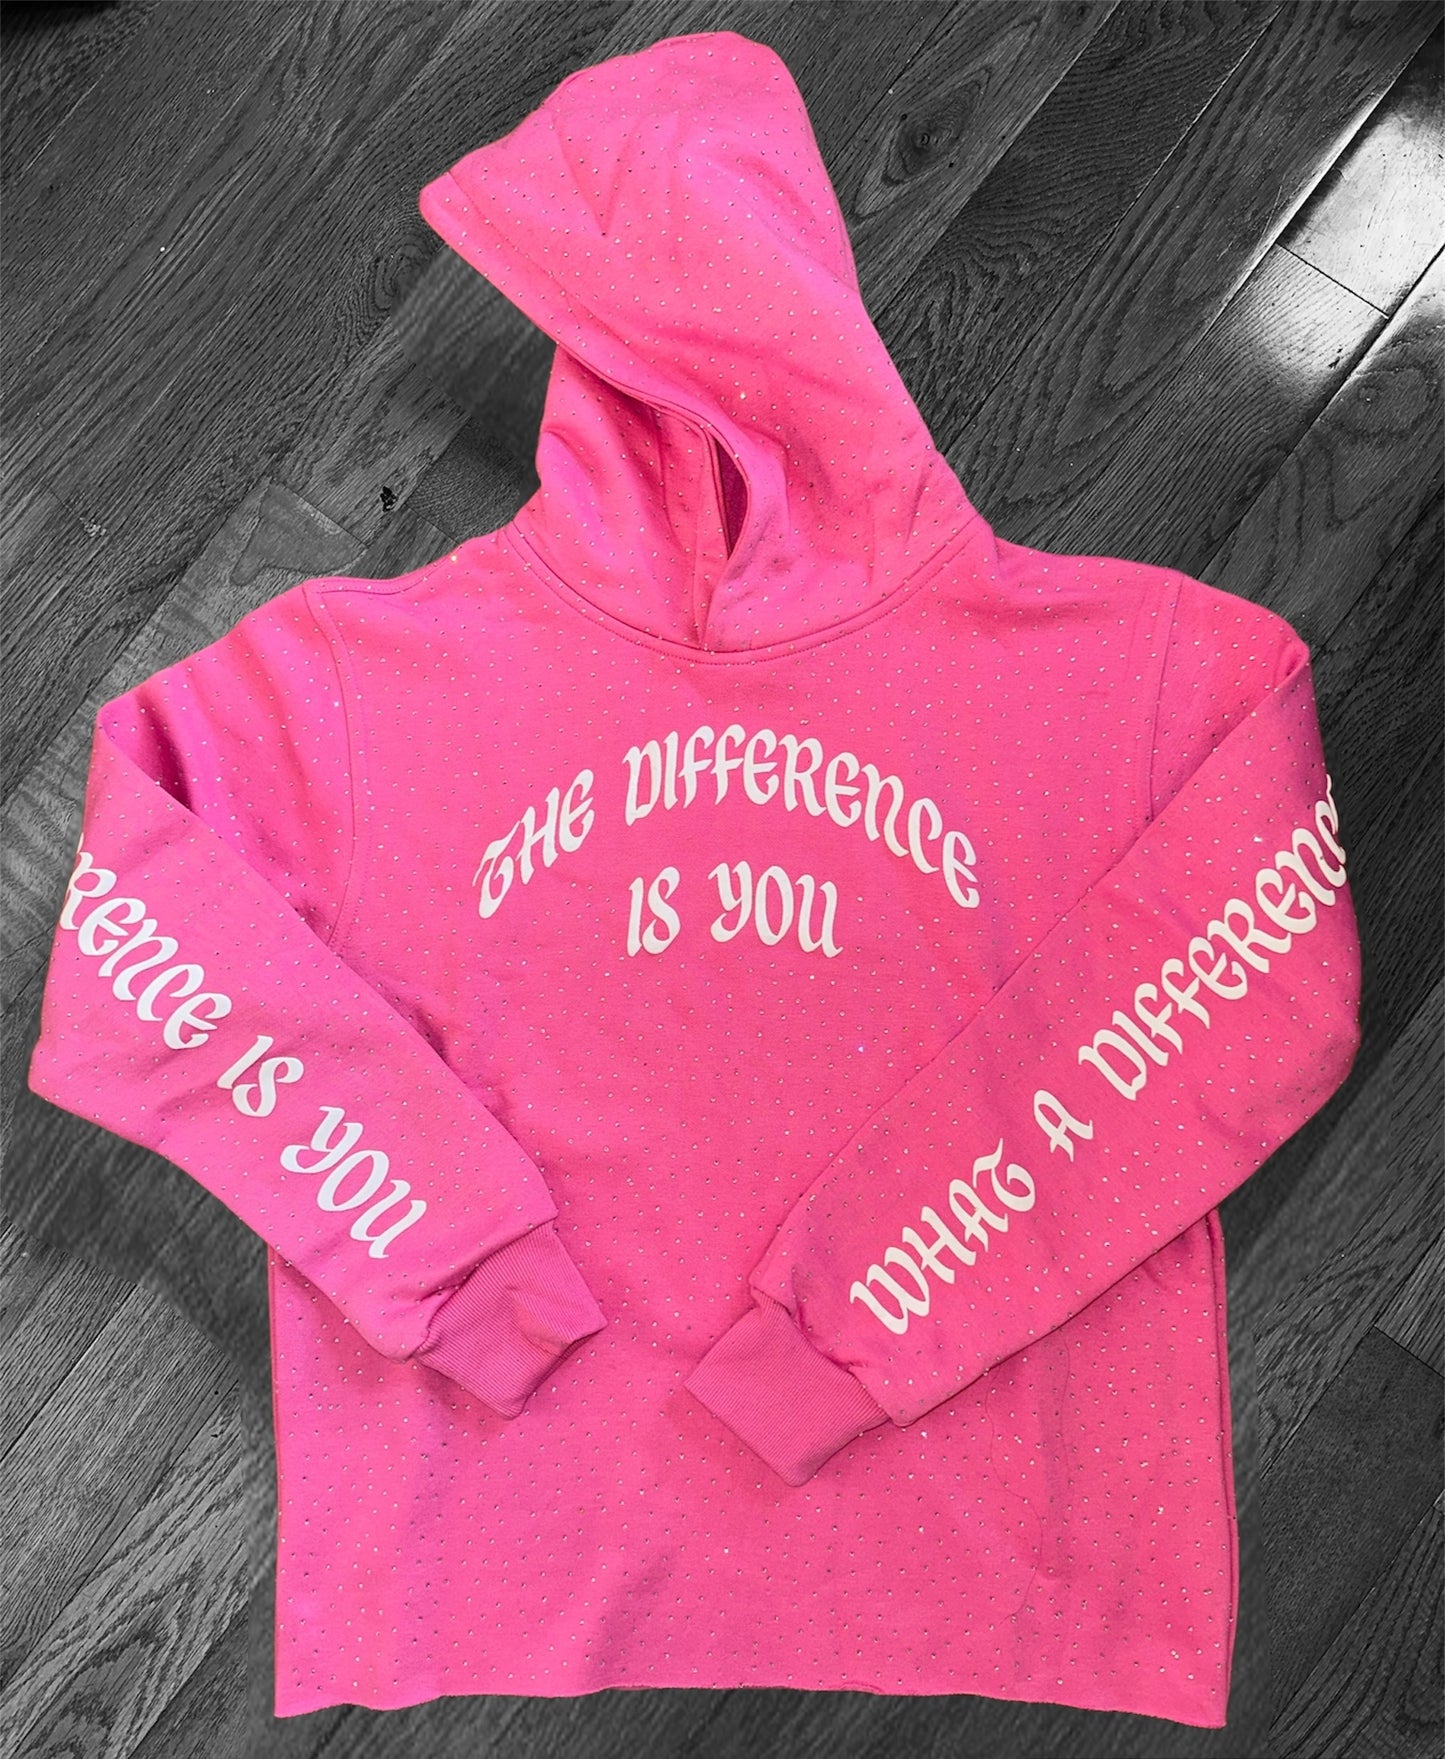 THE DIFFERENCE IS YOU RHINESTONE (PINK) HOODIE